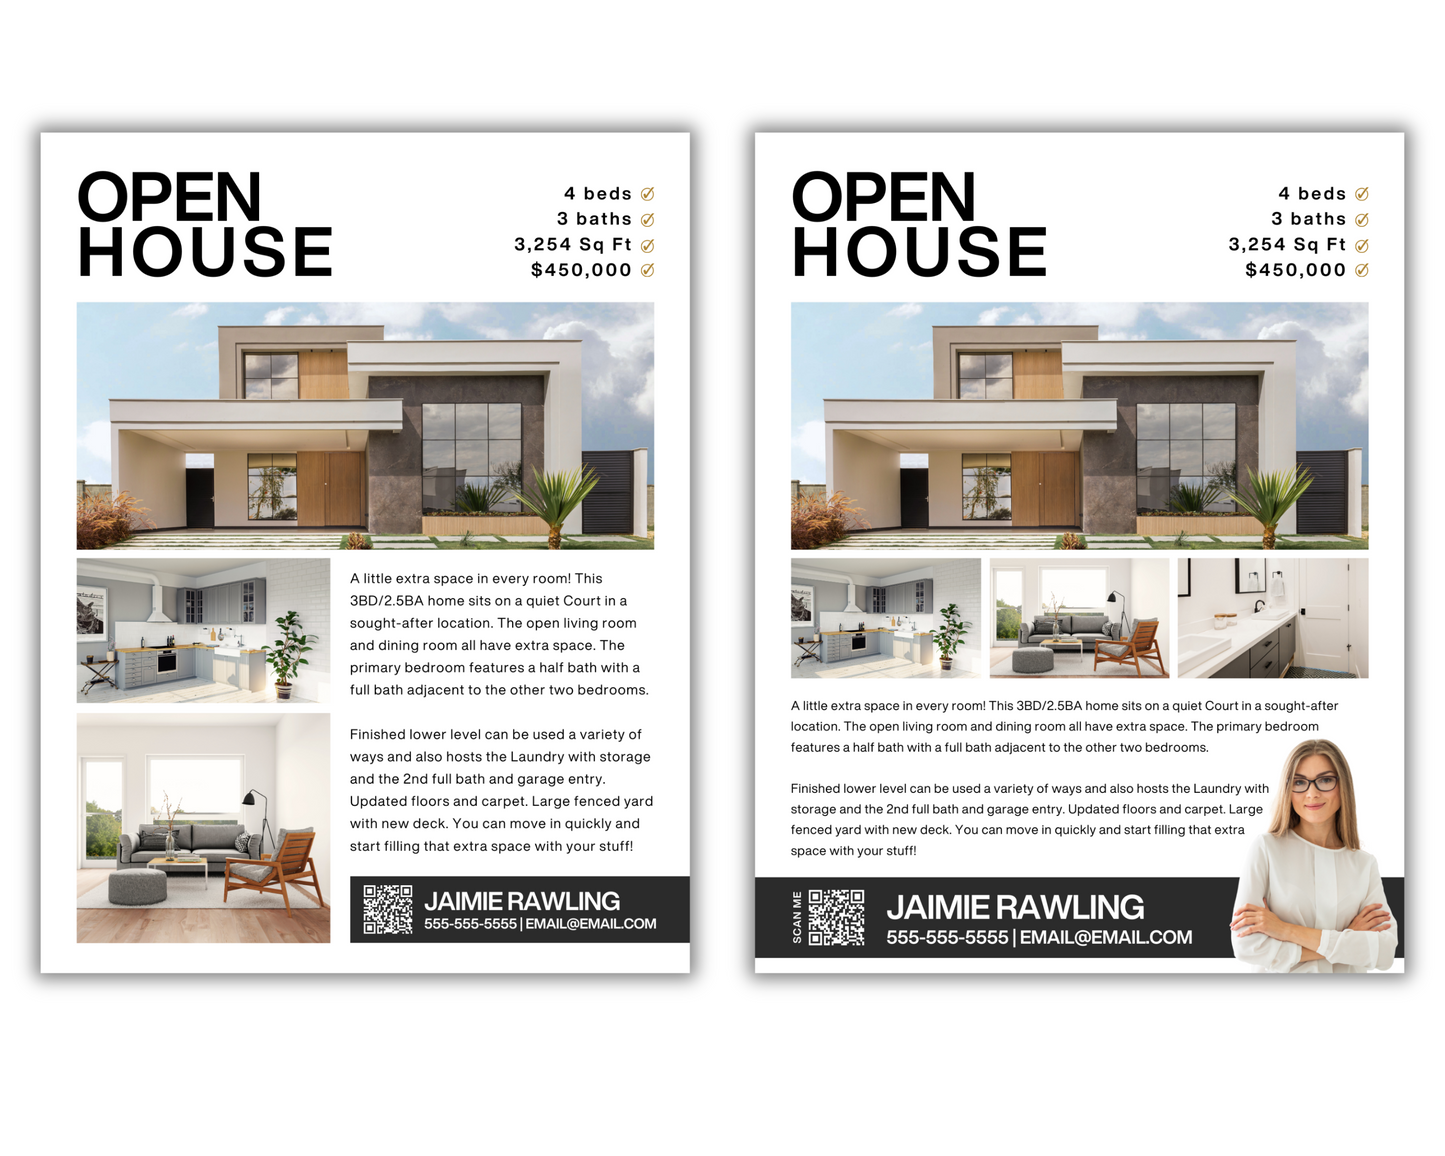 Real Estate New Listing Flyer, Open House Flyer, Real Estate Template, Real Estate Marketing, Real Estate Flyer, Just Listed, Canva Template